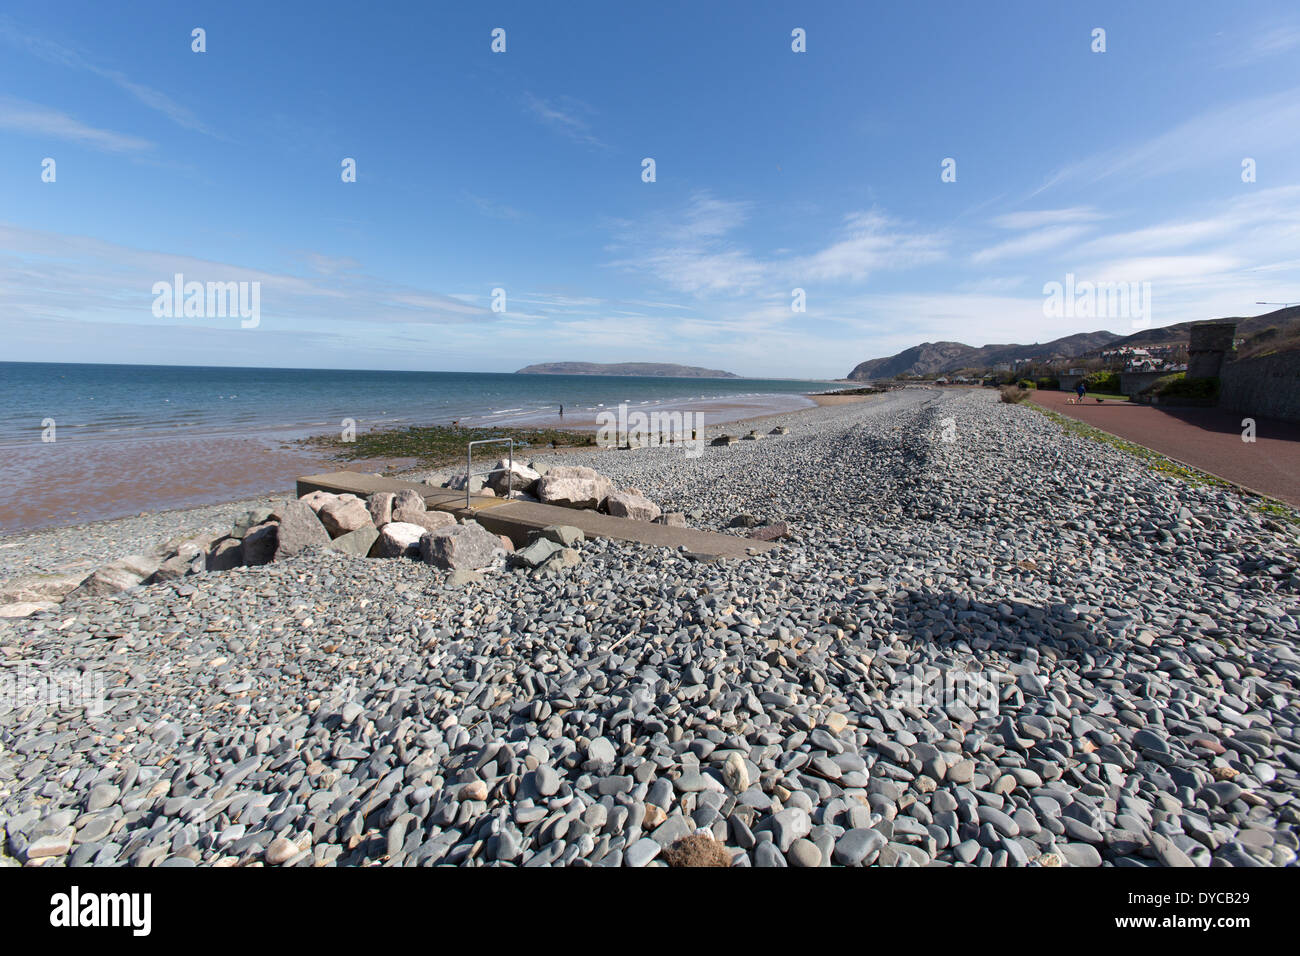 The Wales Coastal Path in North Wales. Picturesque view of the Wales Coast Path at Penmaenmawr esplanade. Stock Photo